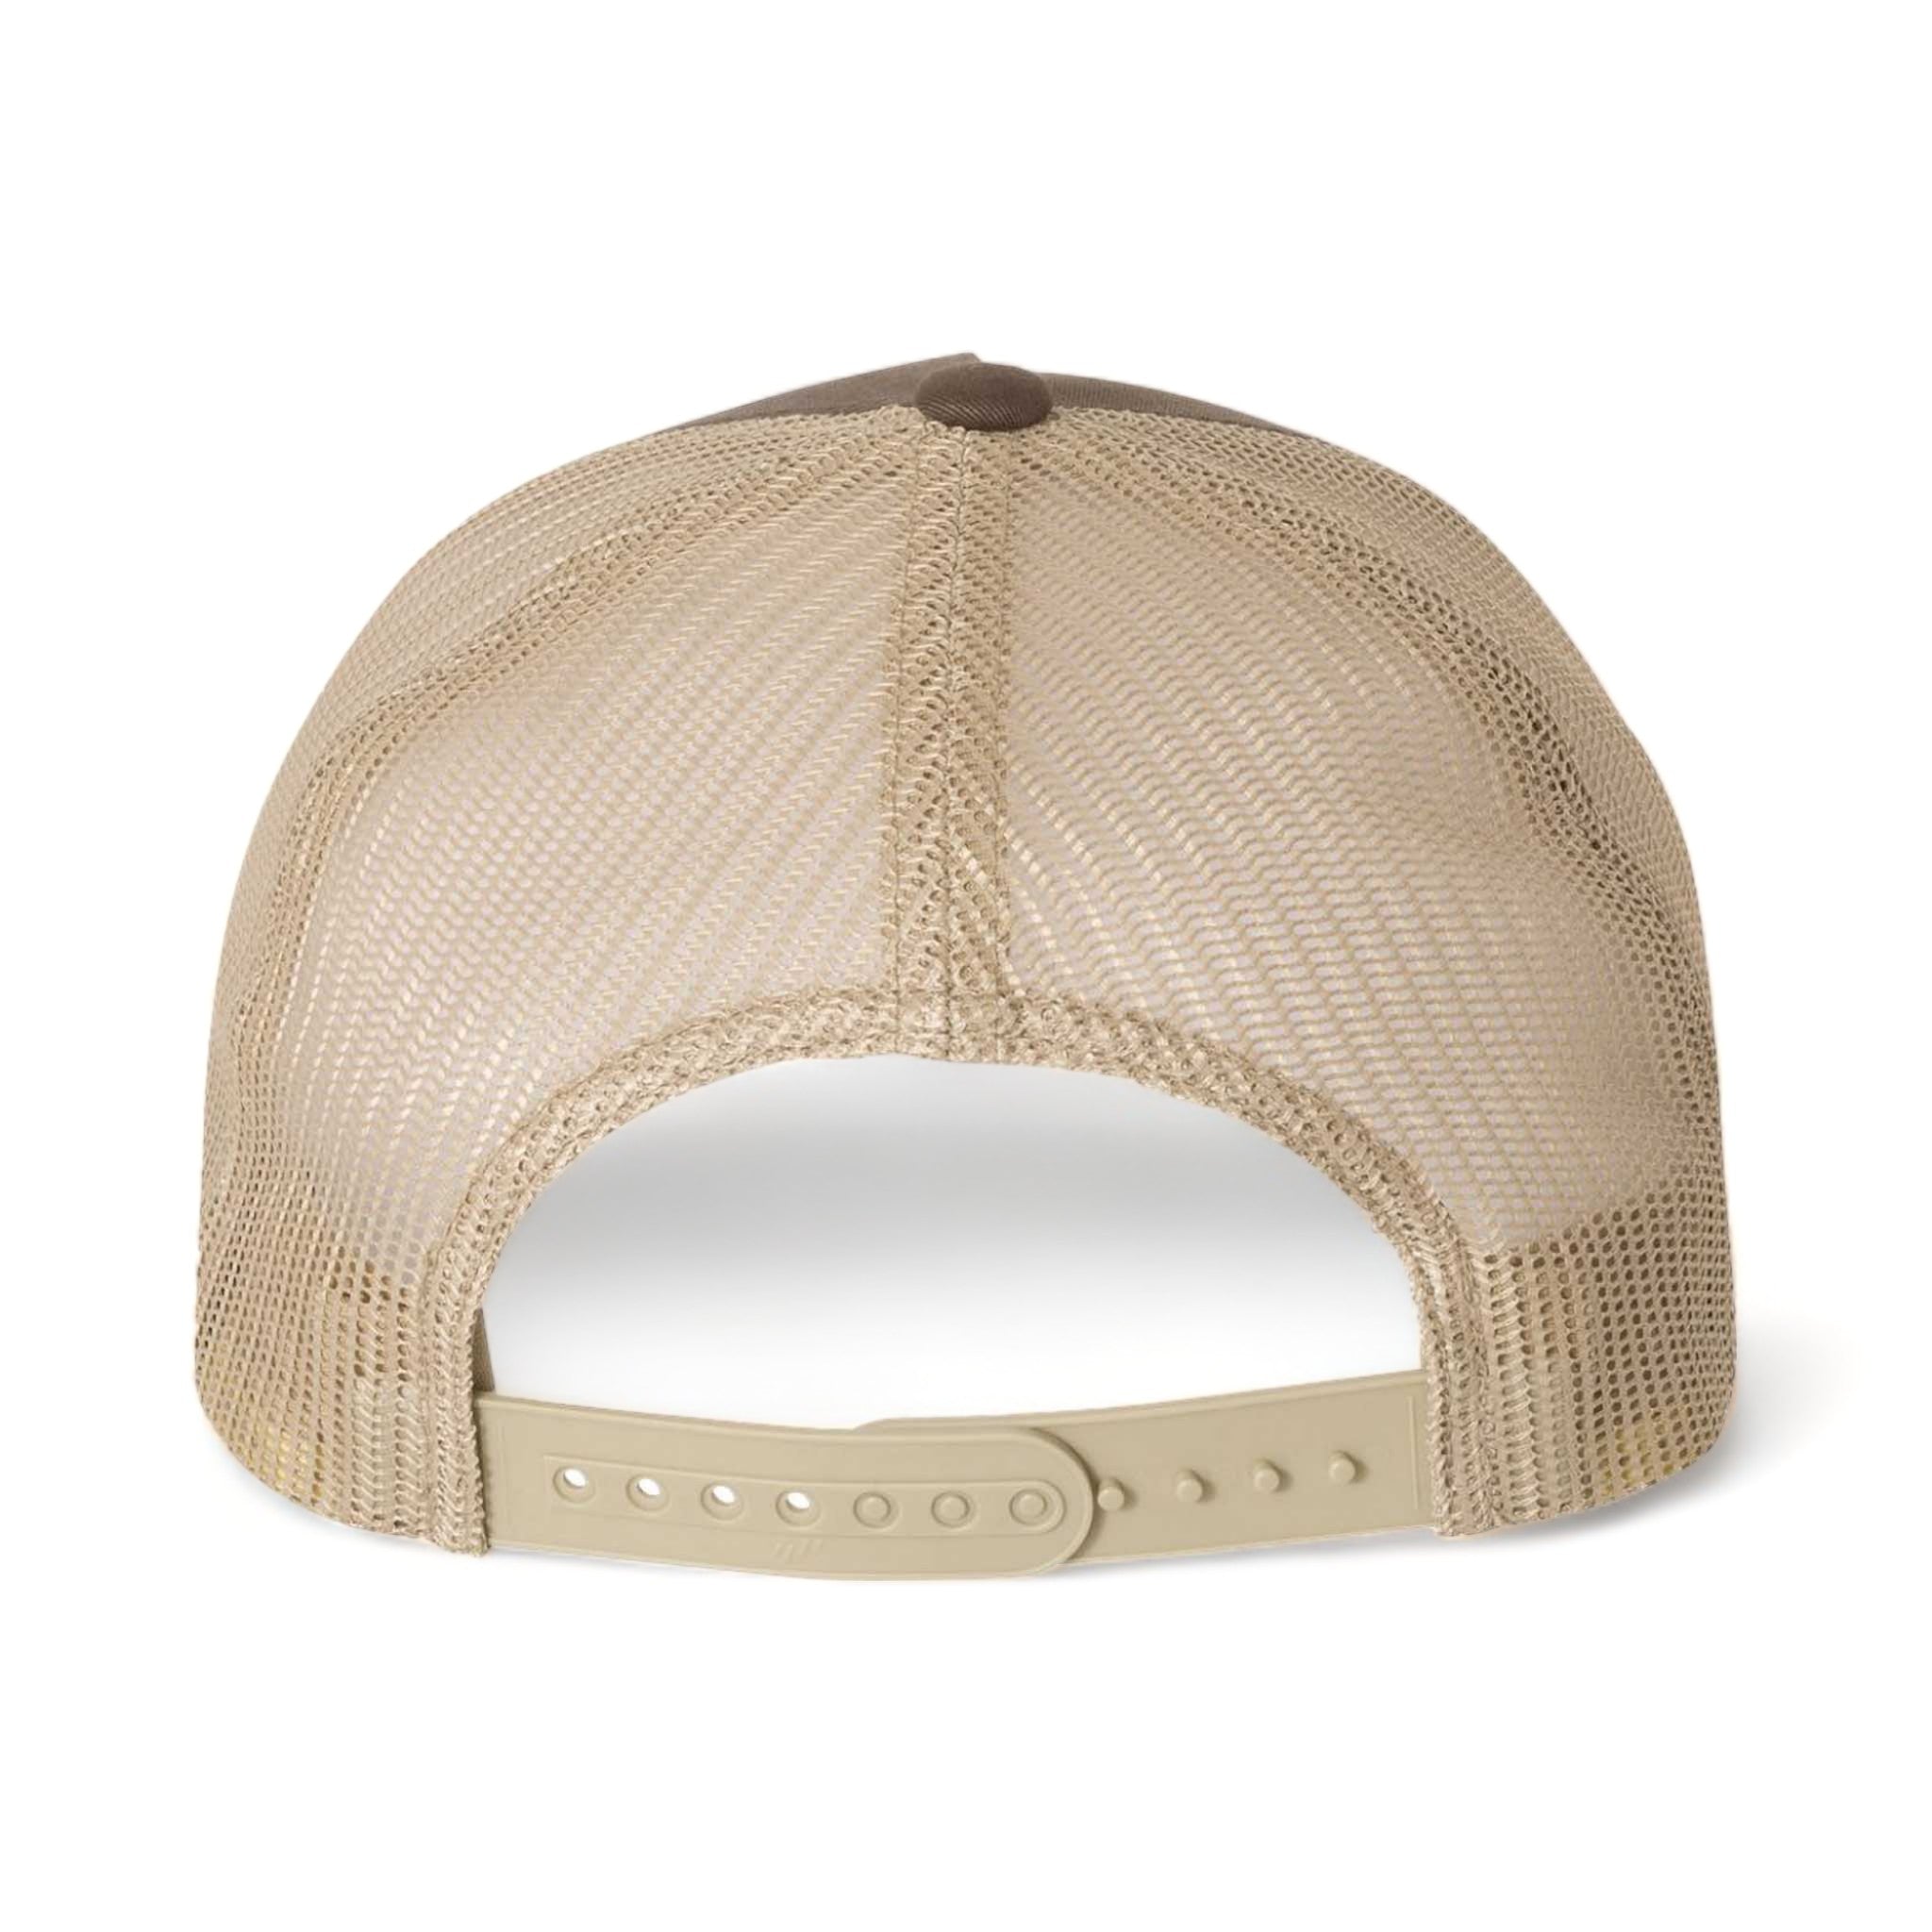 Back view of YP Classics 6506 custom hat in brown and khaki